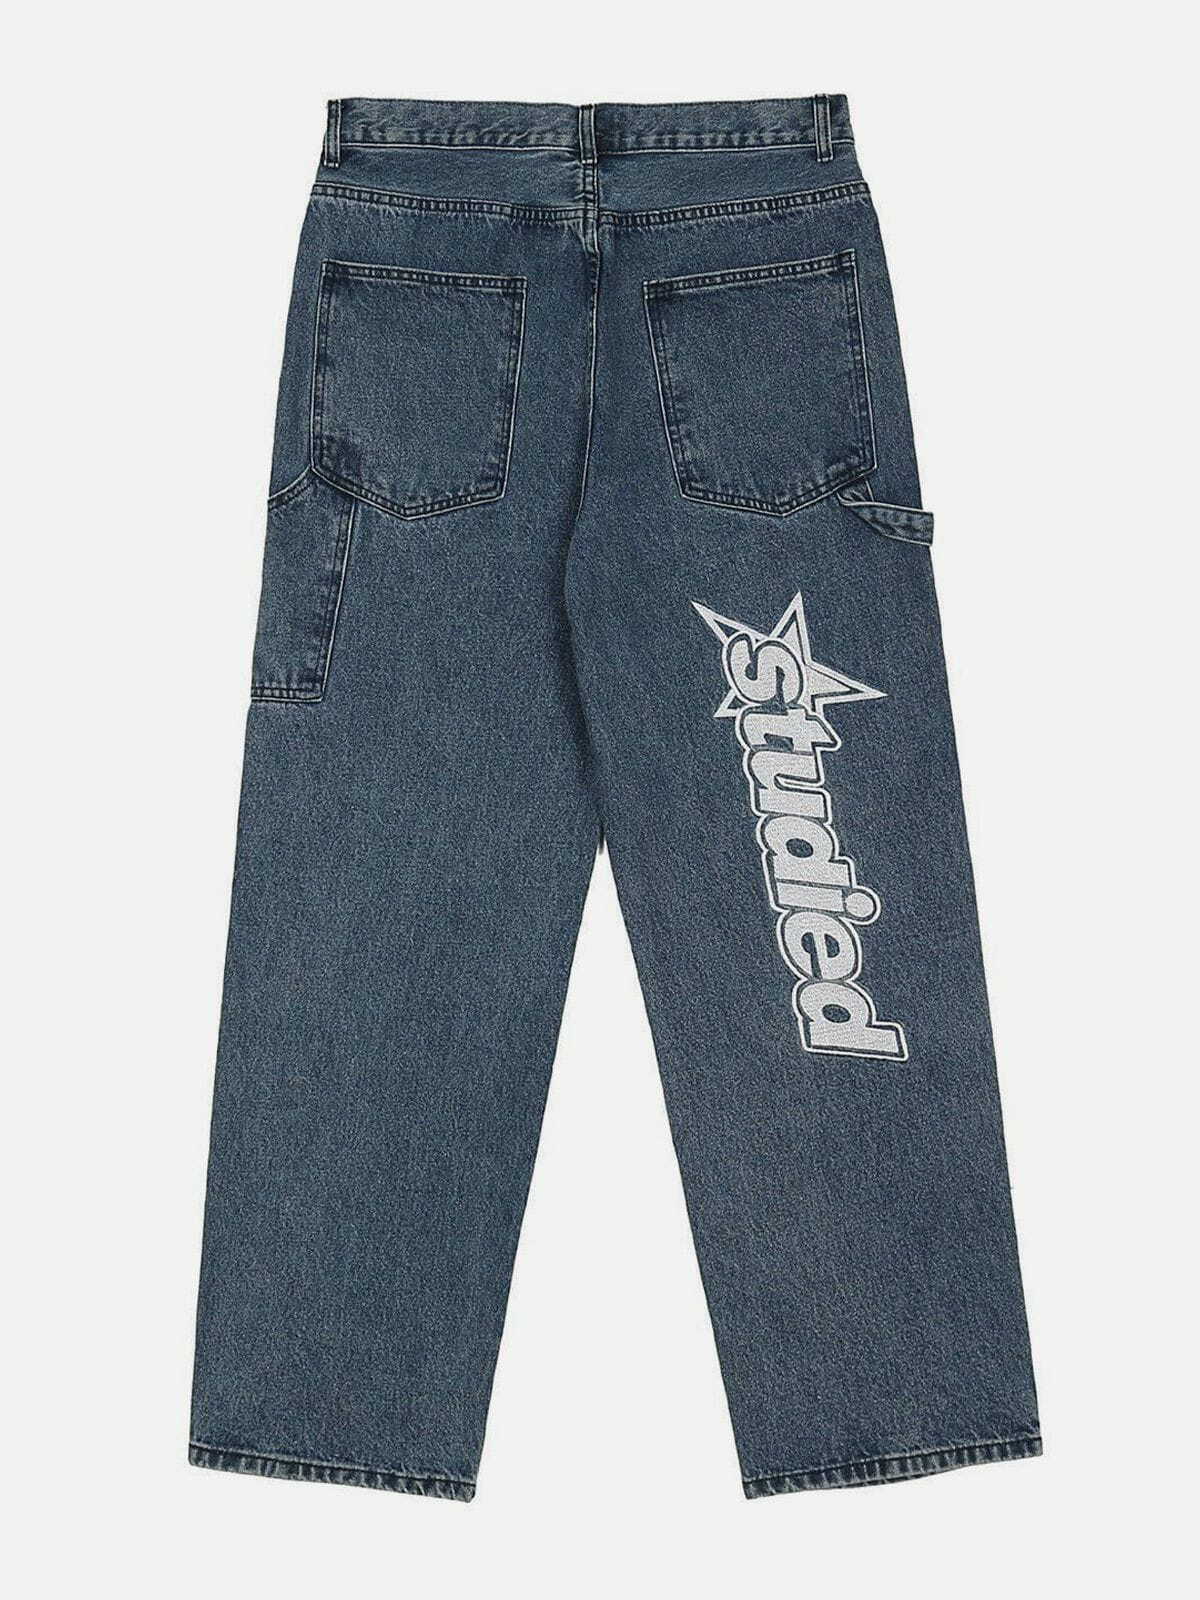 star embroidered jeans edgy & retro streetwear 7961